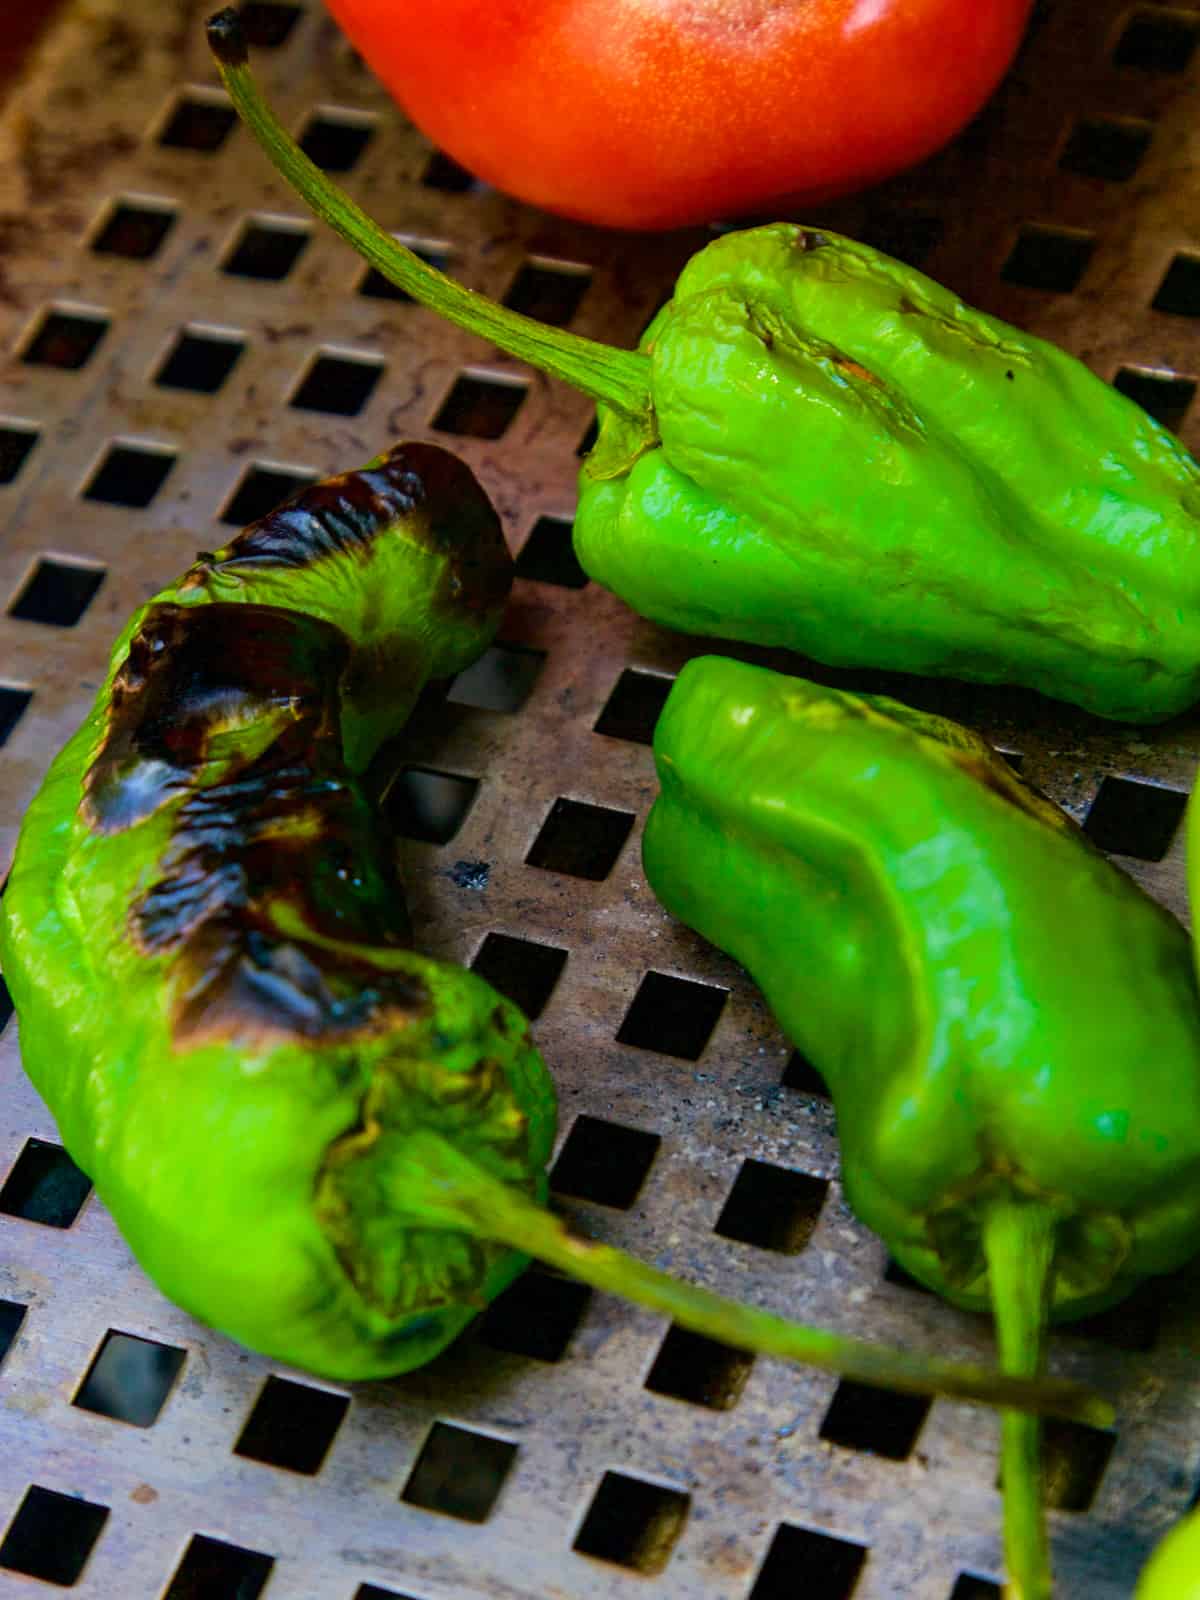 Grilling three chiles for making homemade tomatillo salsa.